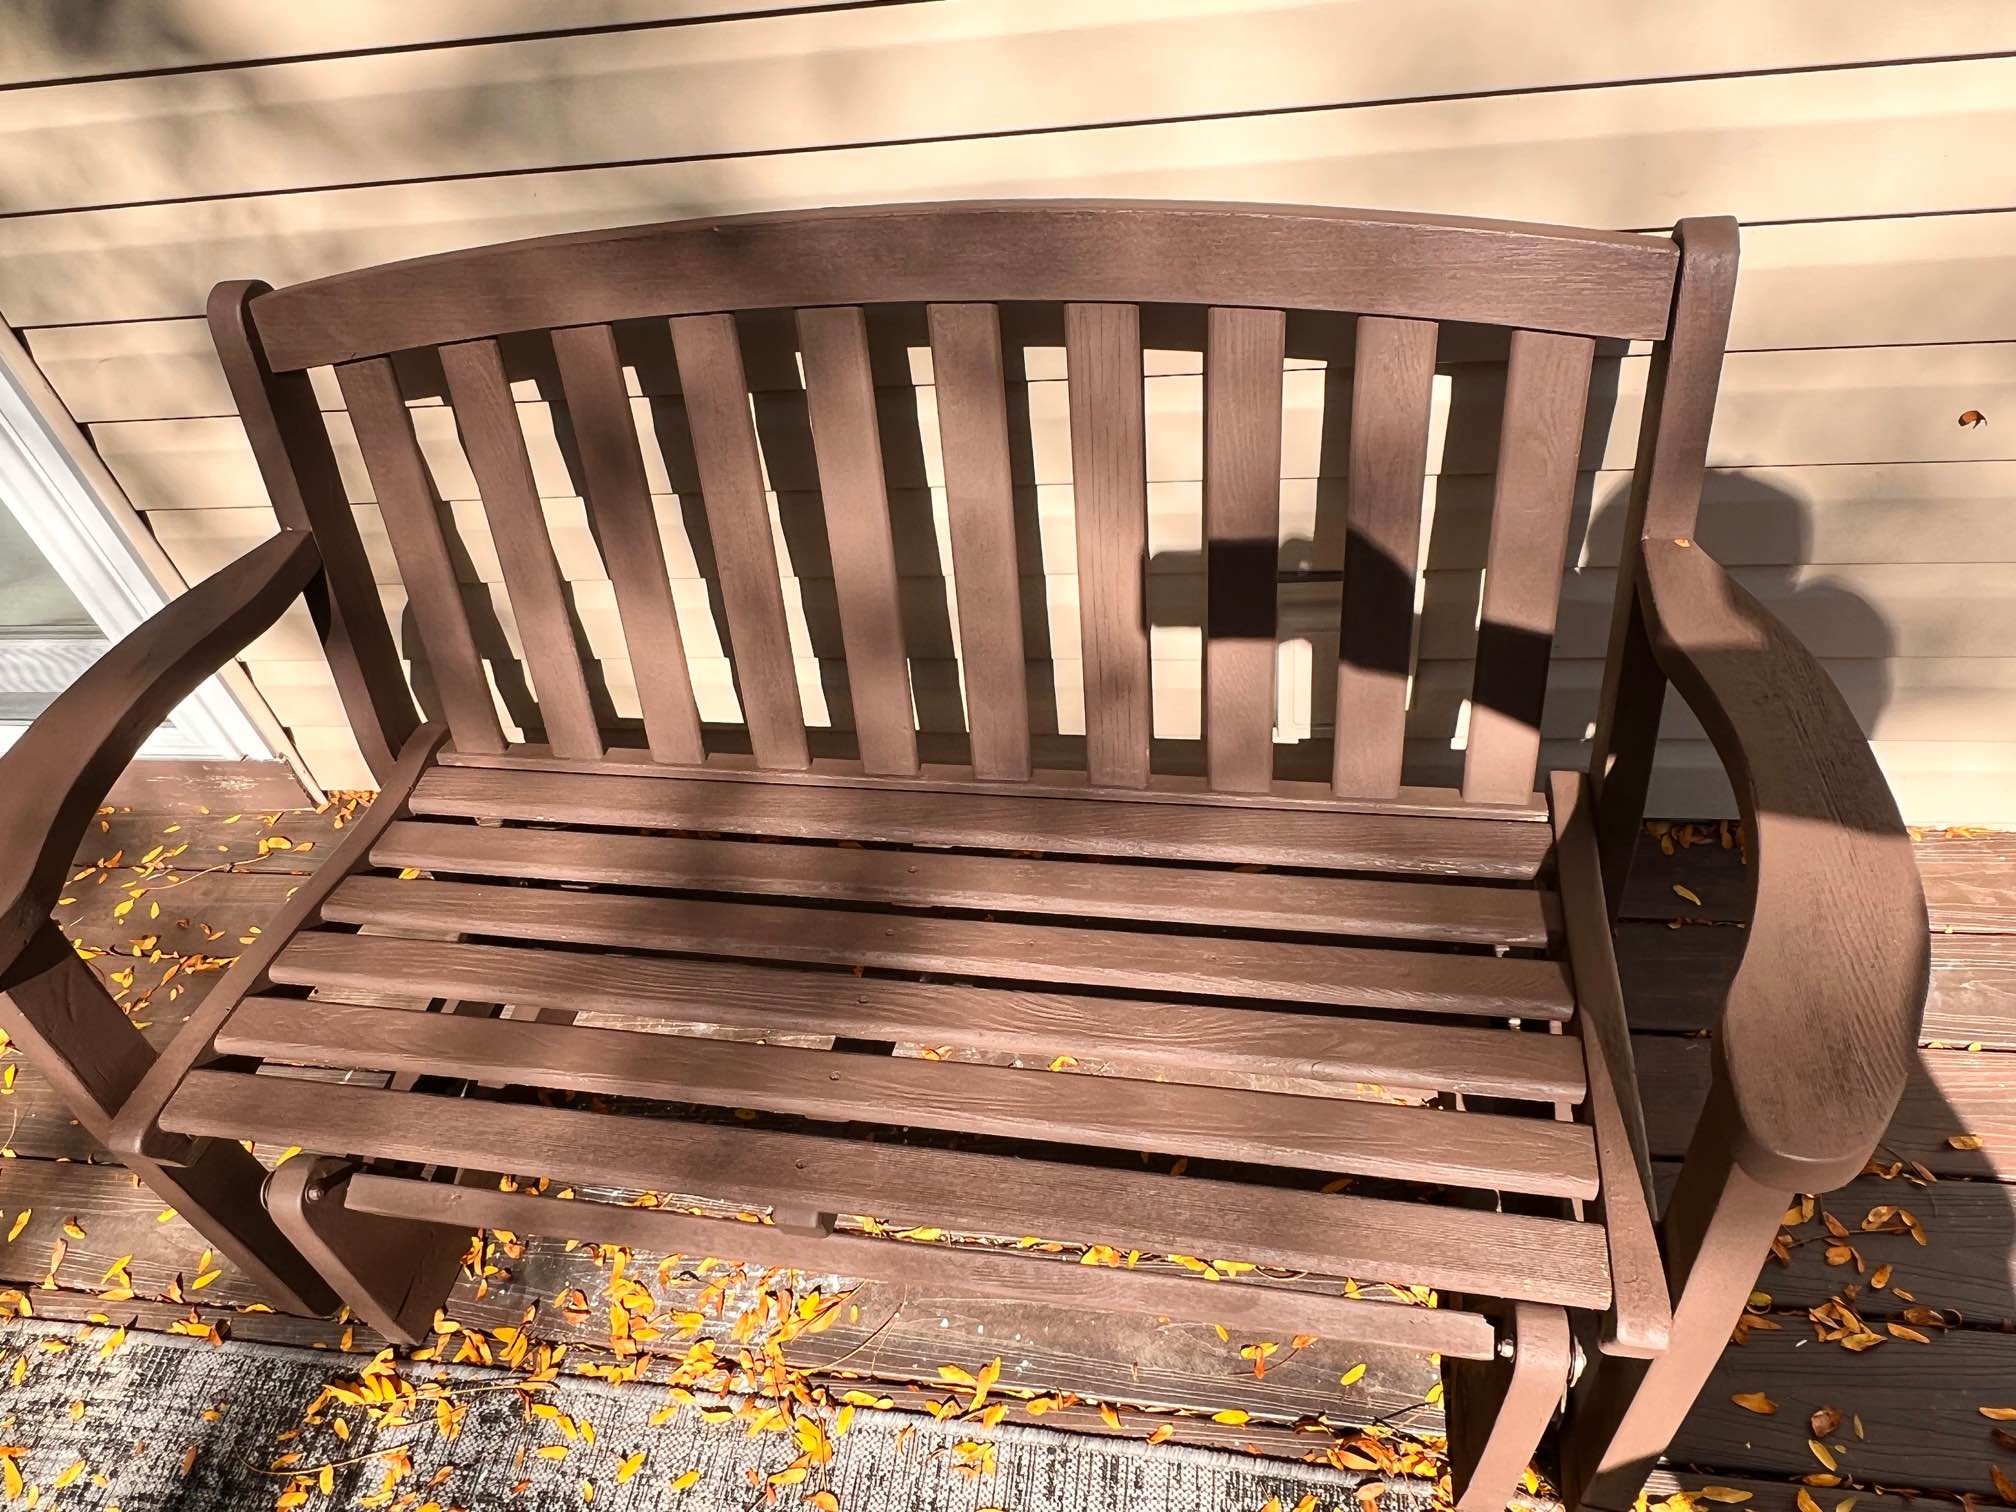 Bench Painting – Allentown, PA After